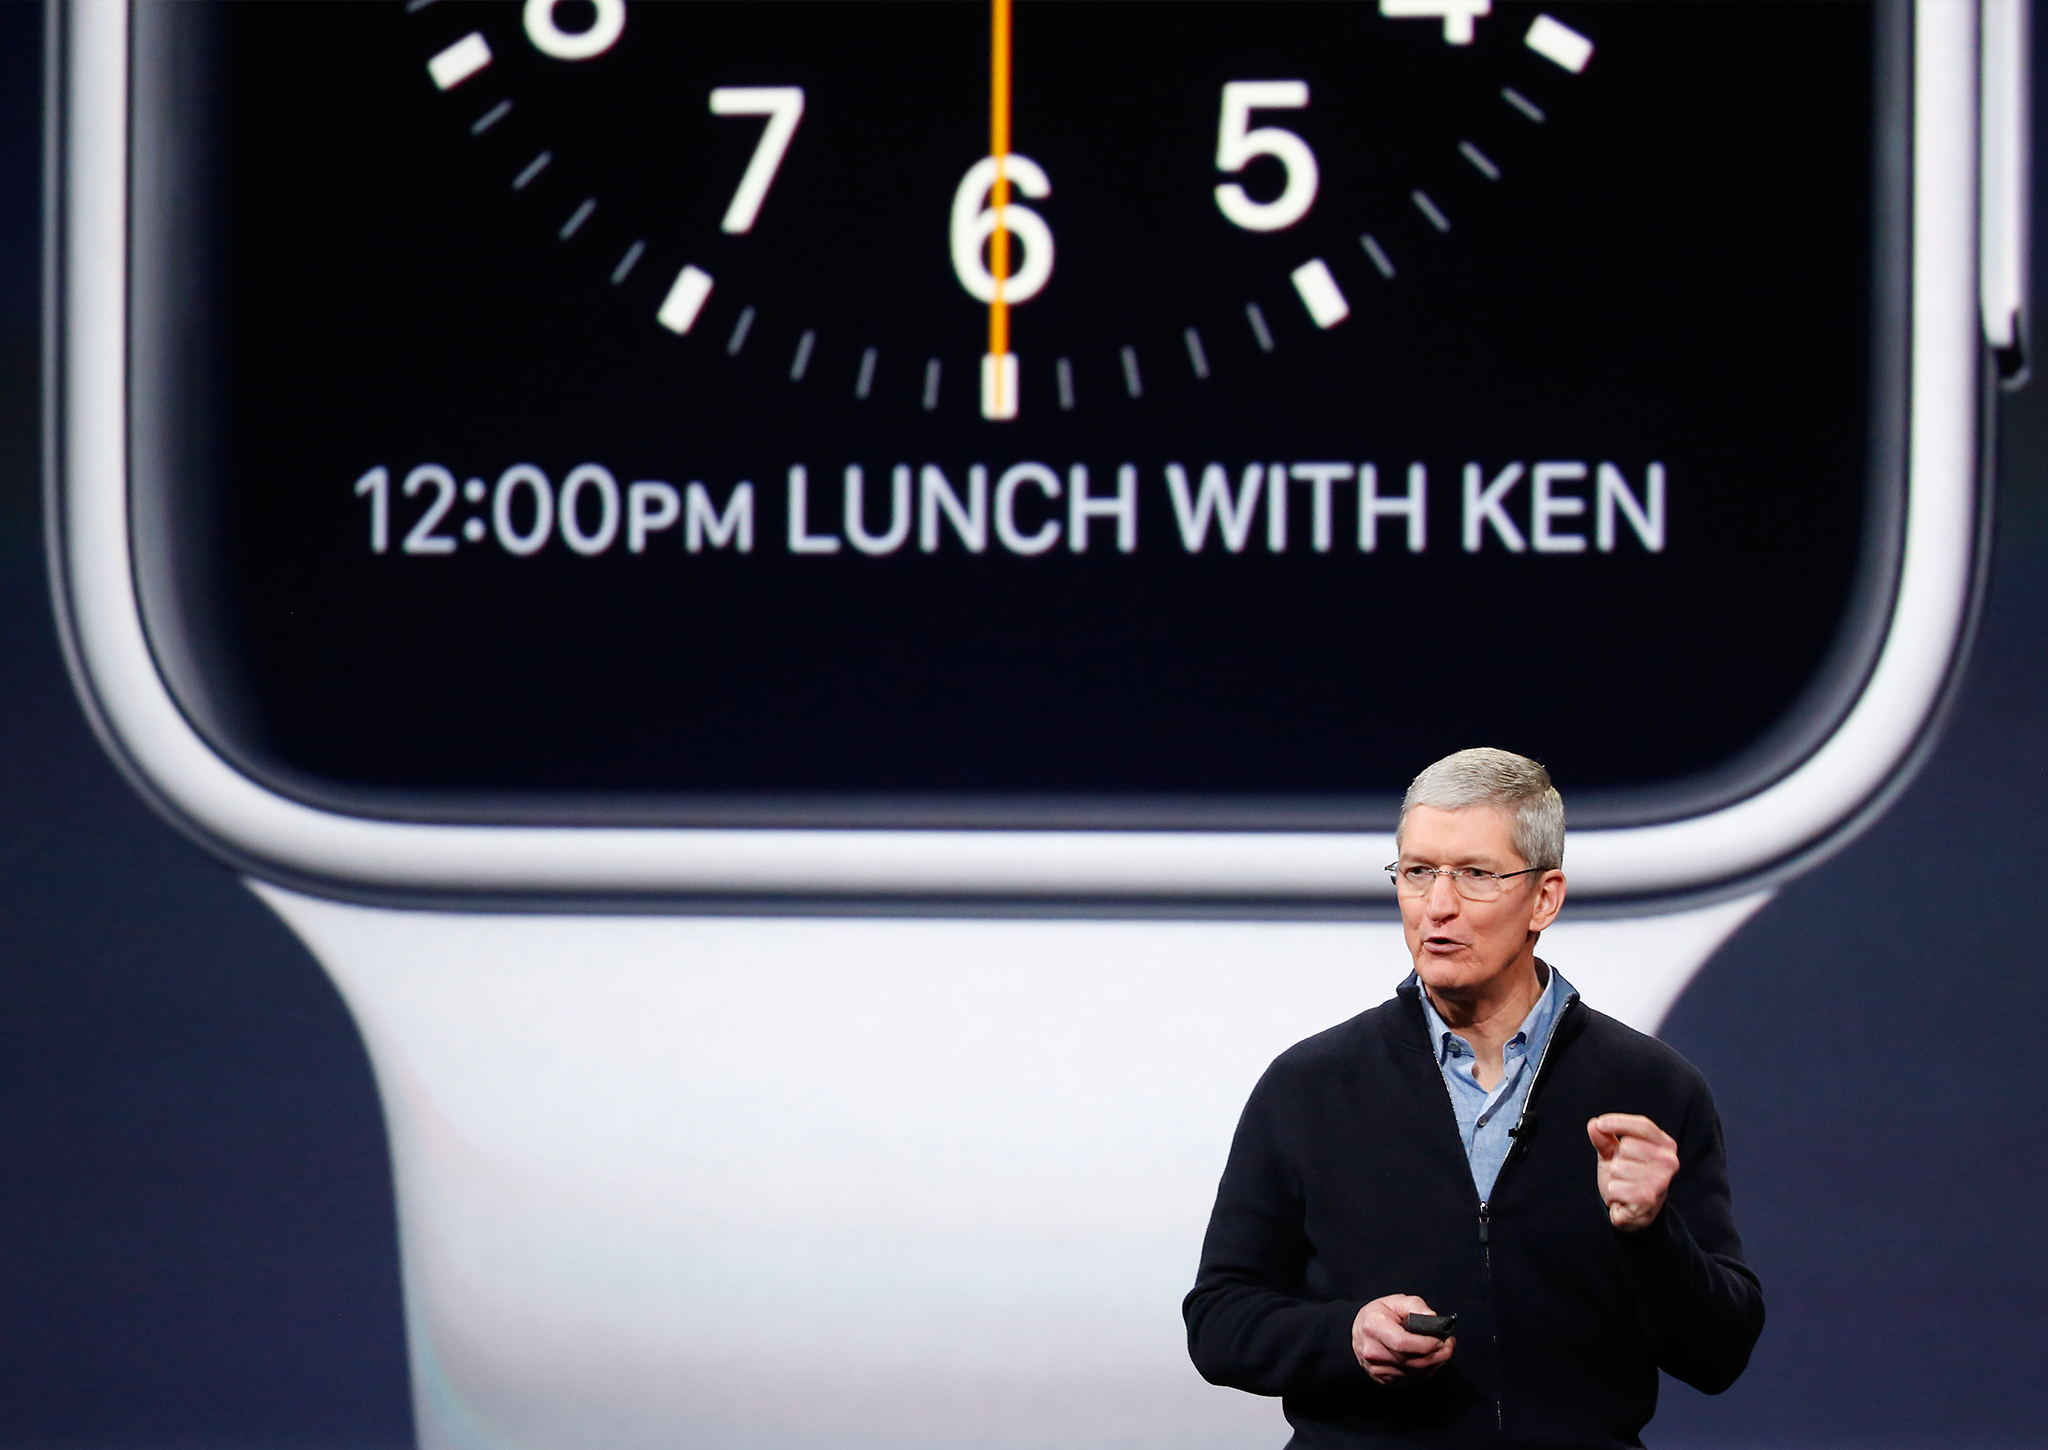 Apple CEO Tim Cook announces the Apple Watch in March – but did he remember to meet Ken for lunch?